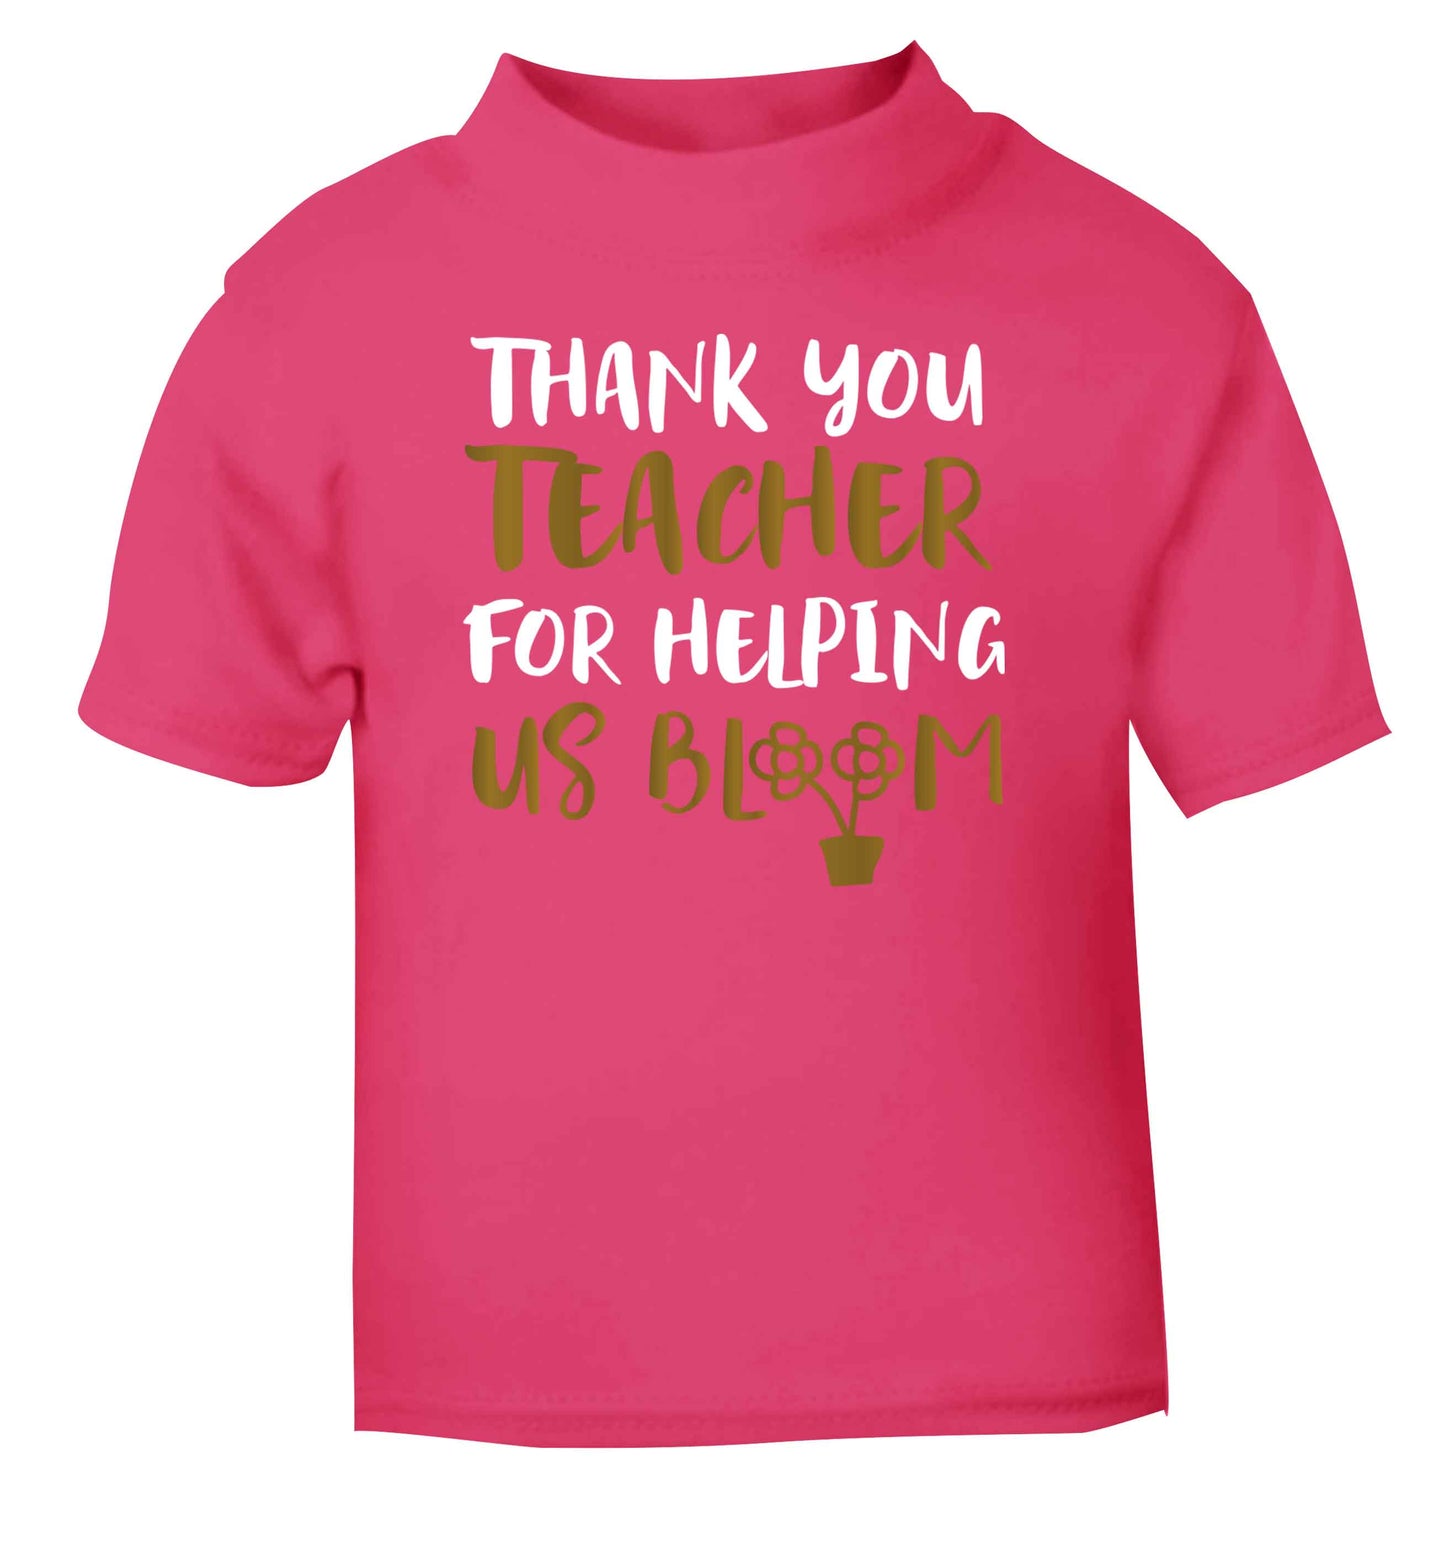 Thank you teacher for helping us bloom pink Baby Toddler Tshirt 2 Years